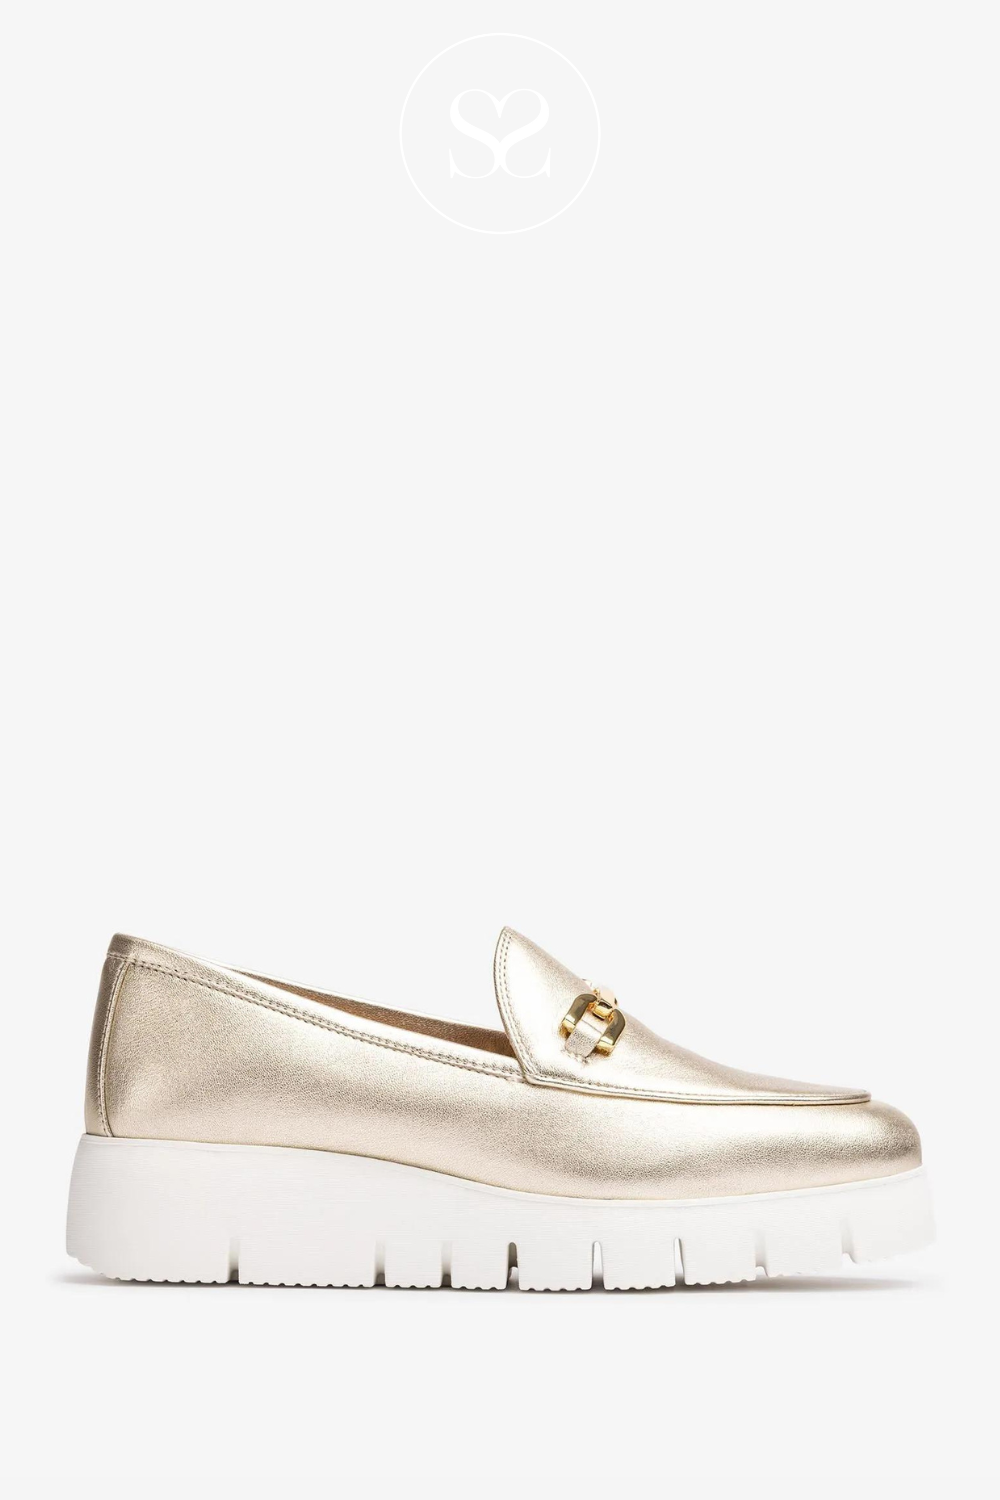 UNISA FAMO GOLD LEATHER WEDGE LOAFER WITH GOLD BUCKLE DETAIL